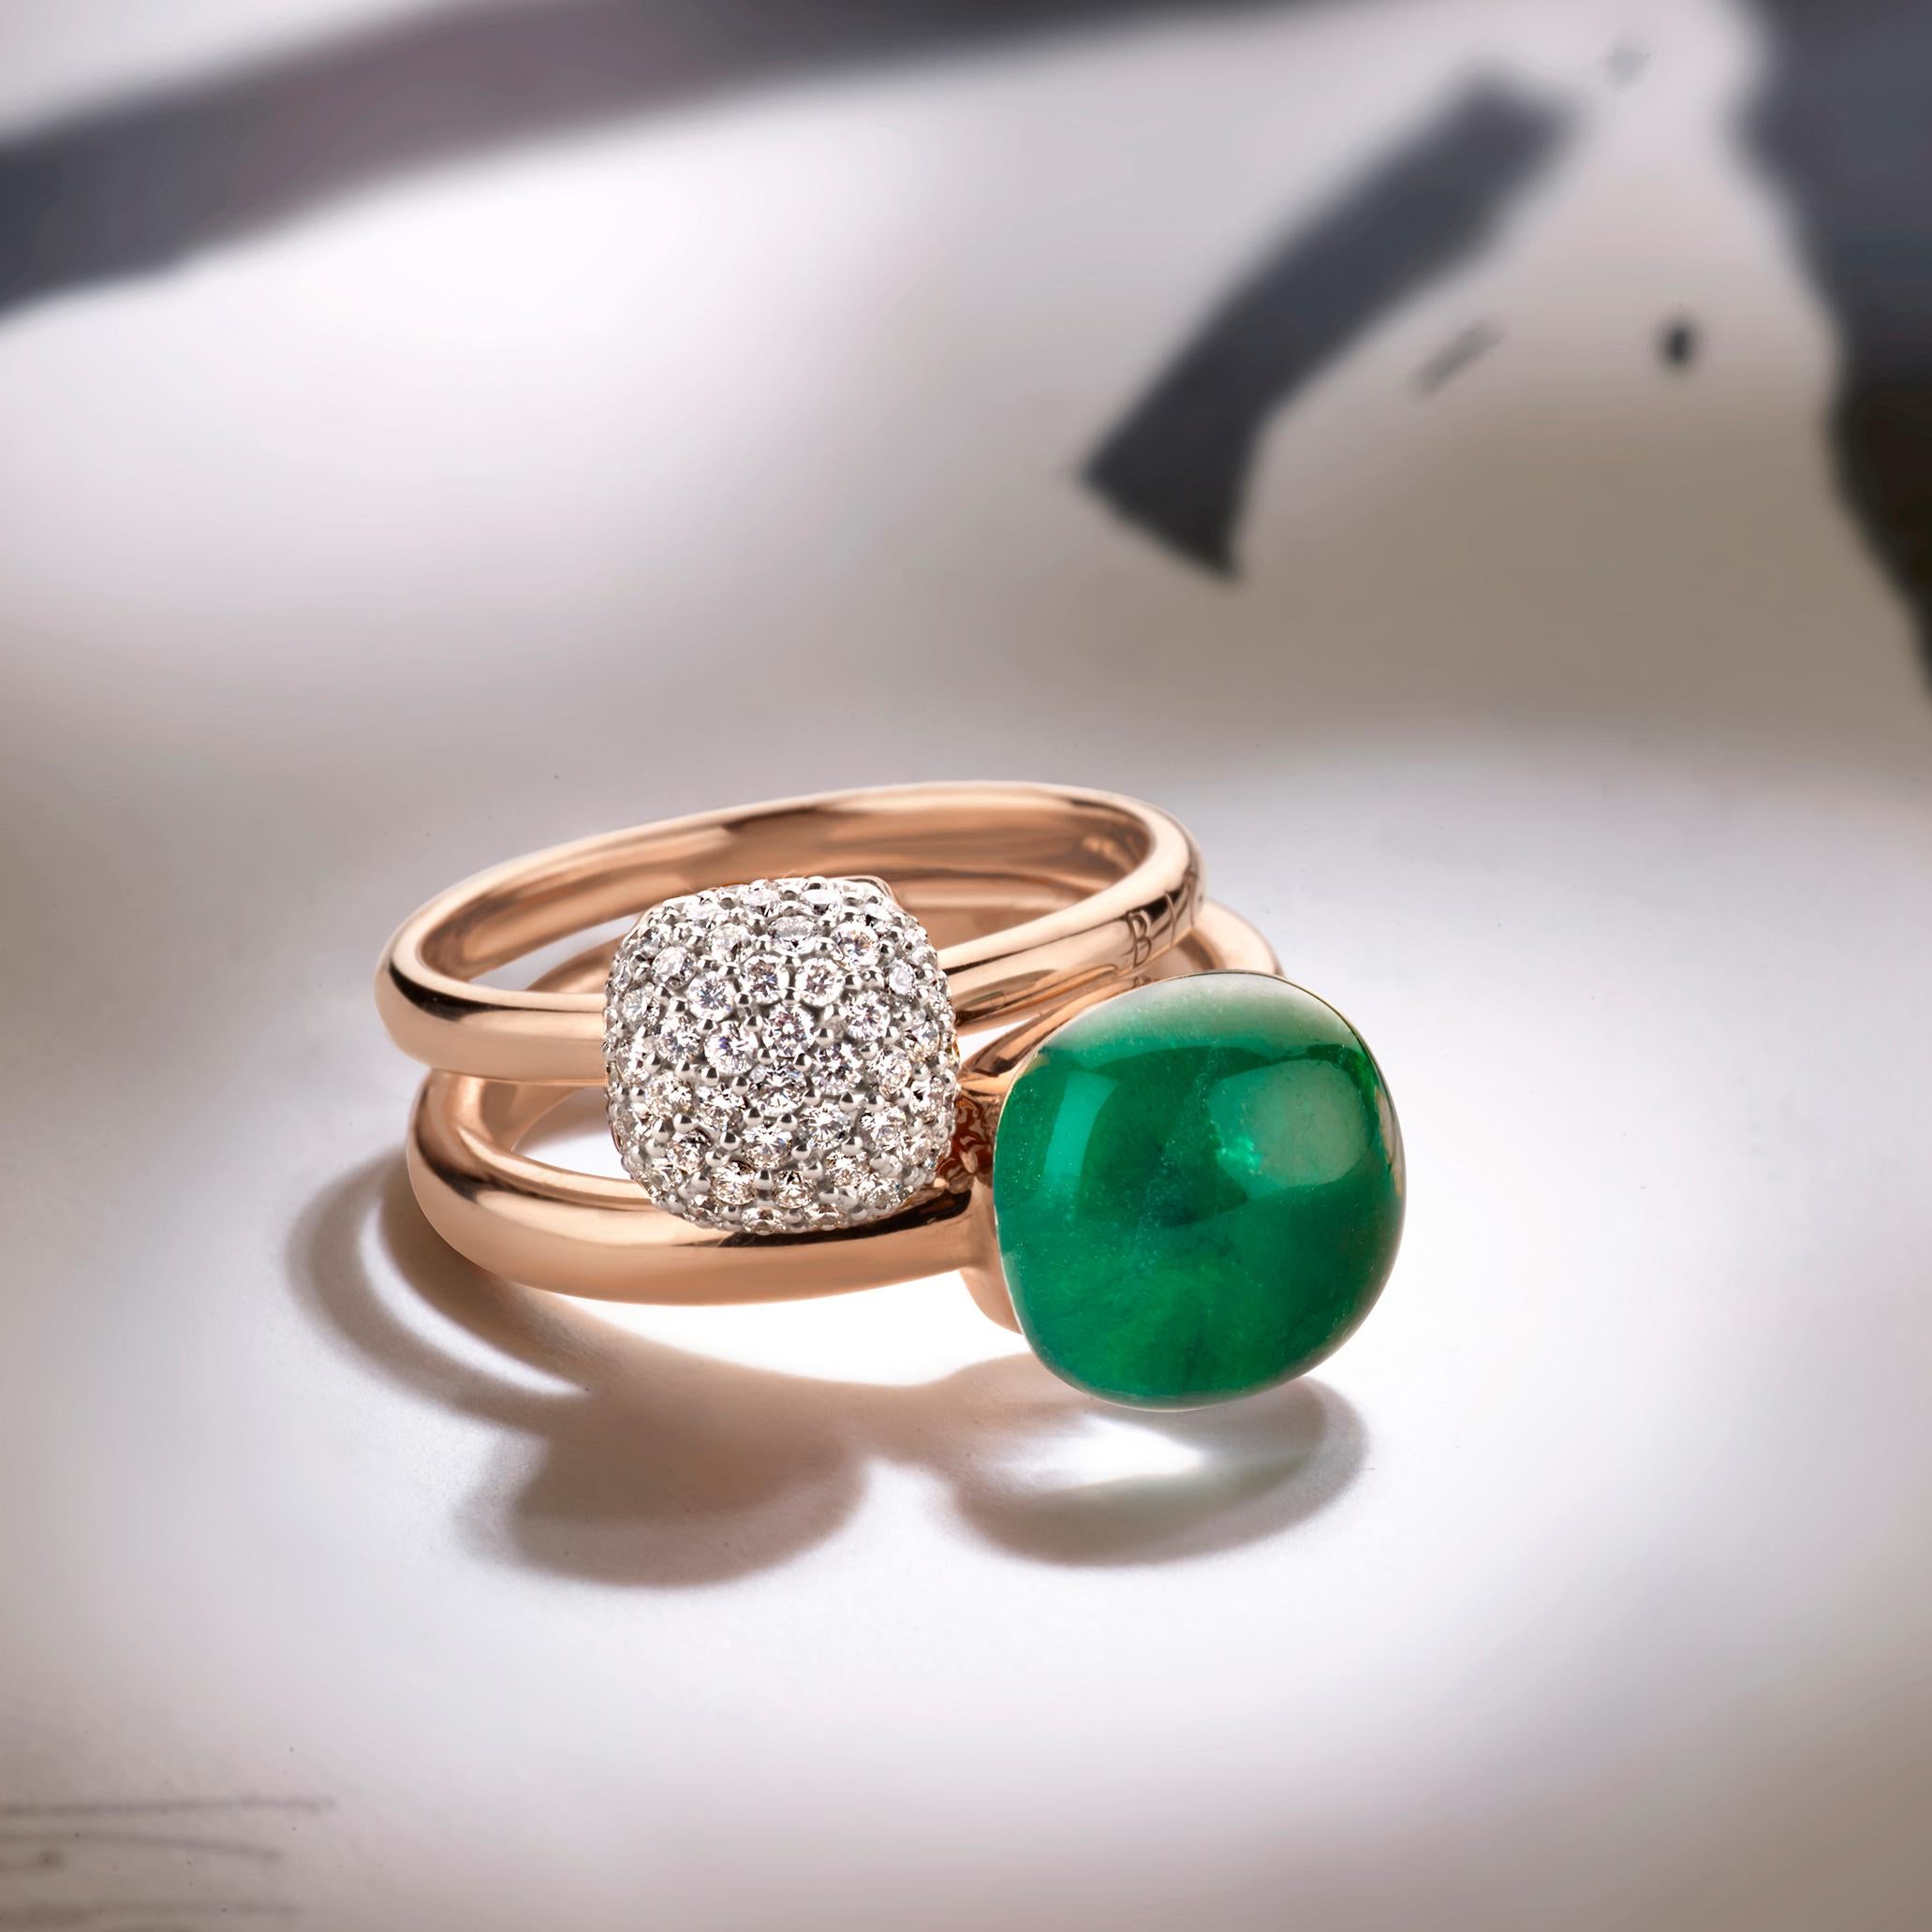 For Sale:  Emerald and Rock Crystal Ring in 18kt Rose Gold by BIGLI 4